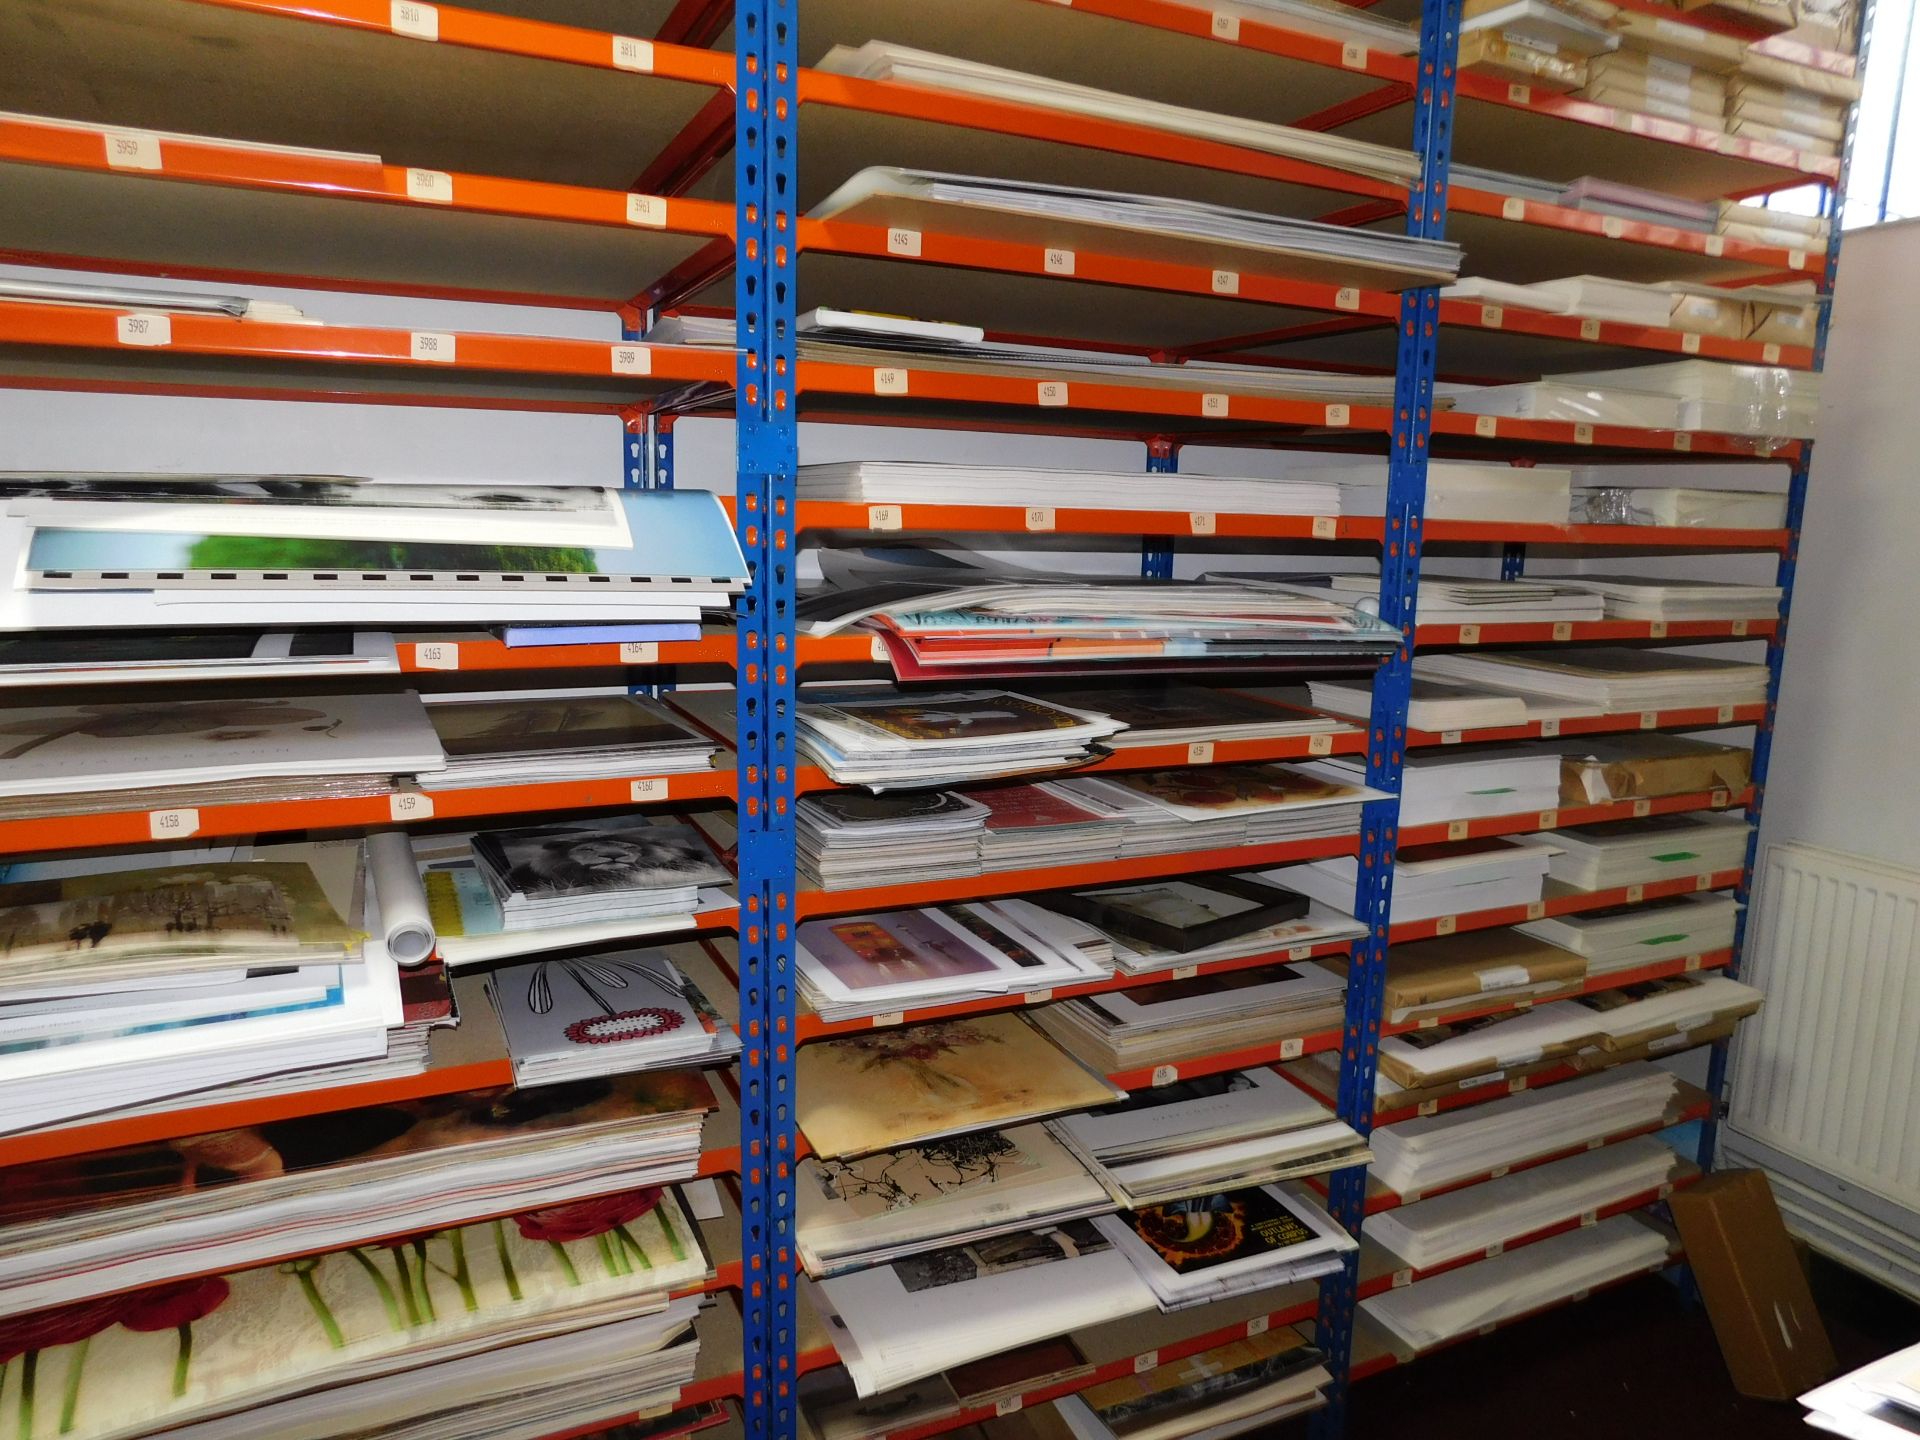 6 Bays of Multi-Tiered Shelving (Collection – Thursday 31st May) - Image 3 of 3